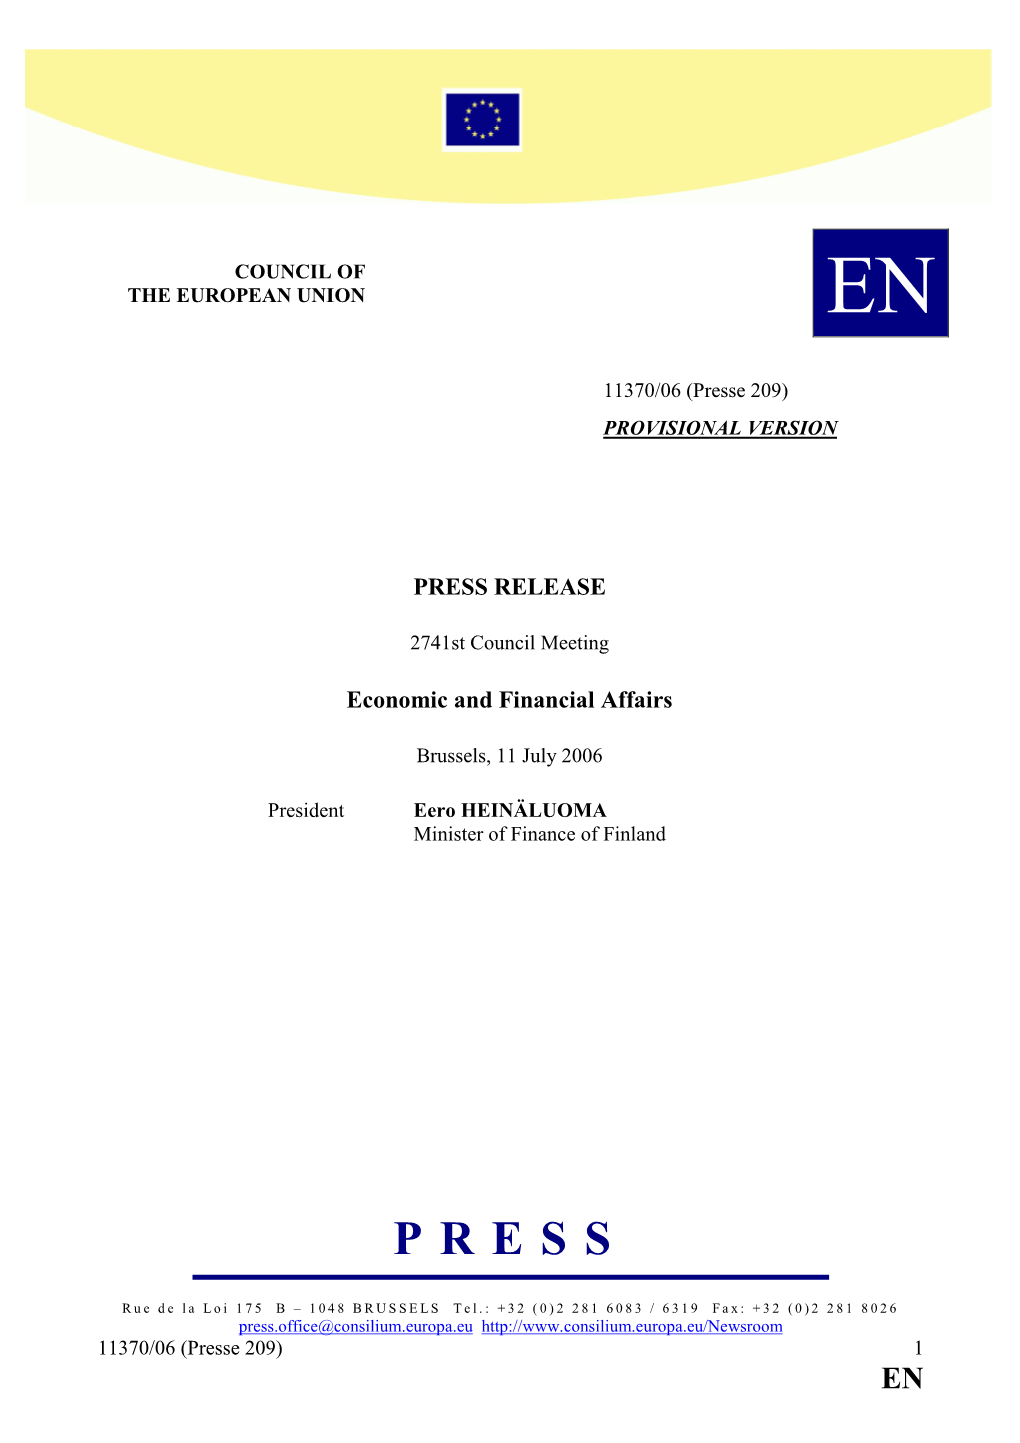 PRESS RELEASE Economic and Financial Affairs